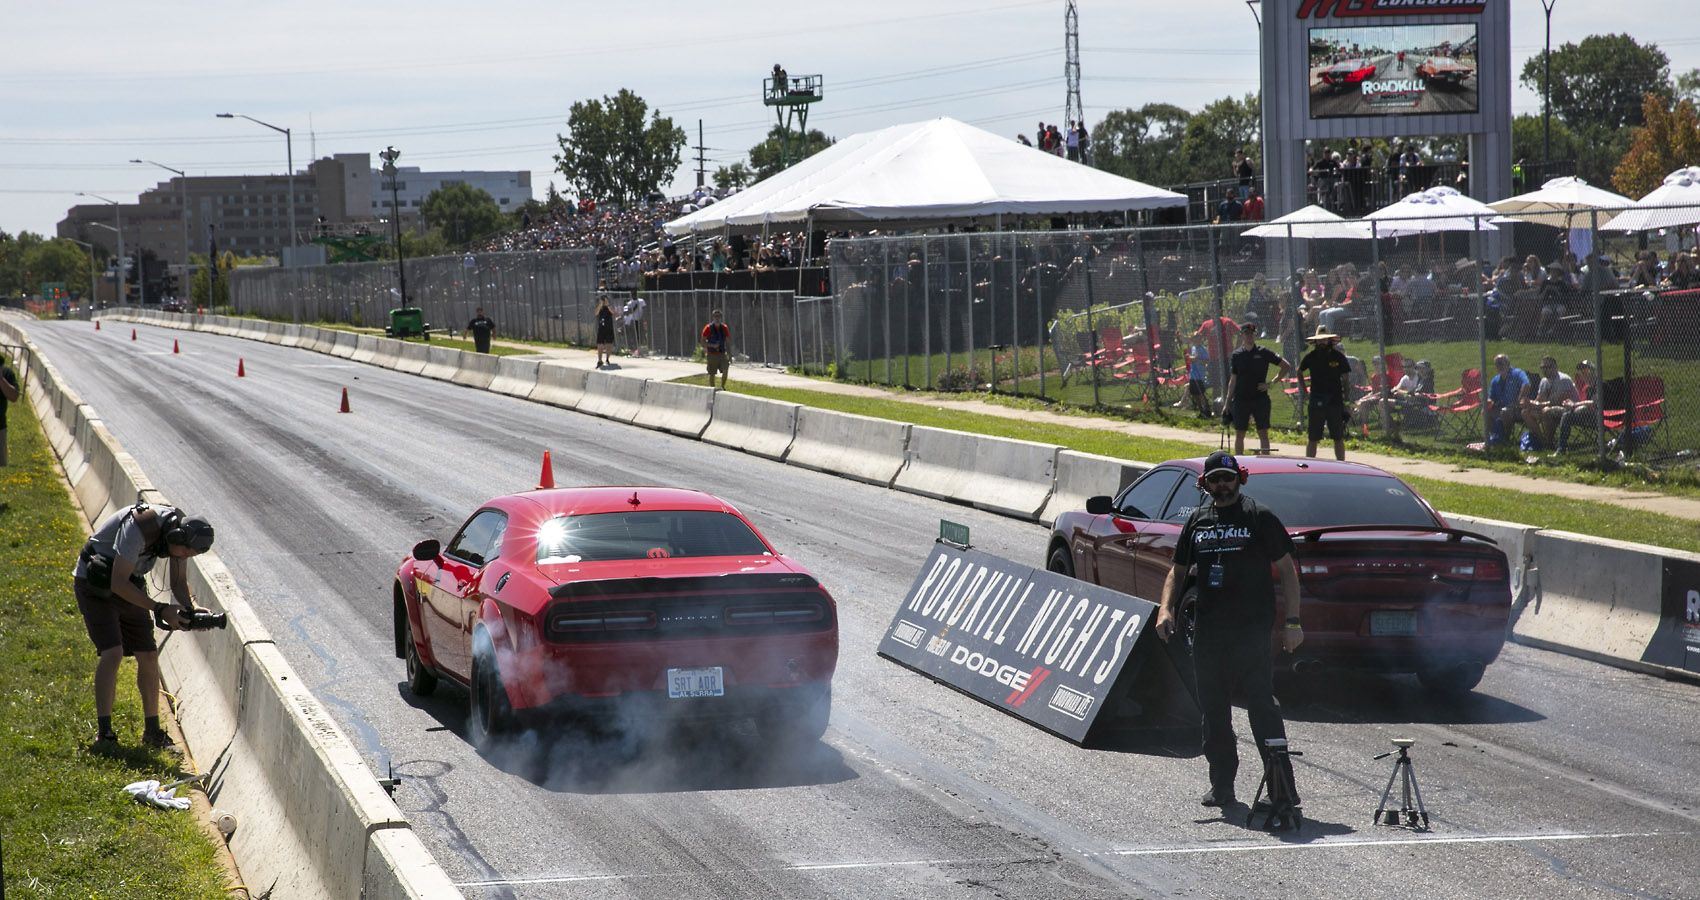 Multi-Day Dodge Speed Week Event, August 12-20, 2022, On Woodward Avenue 